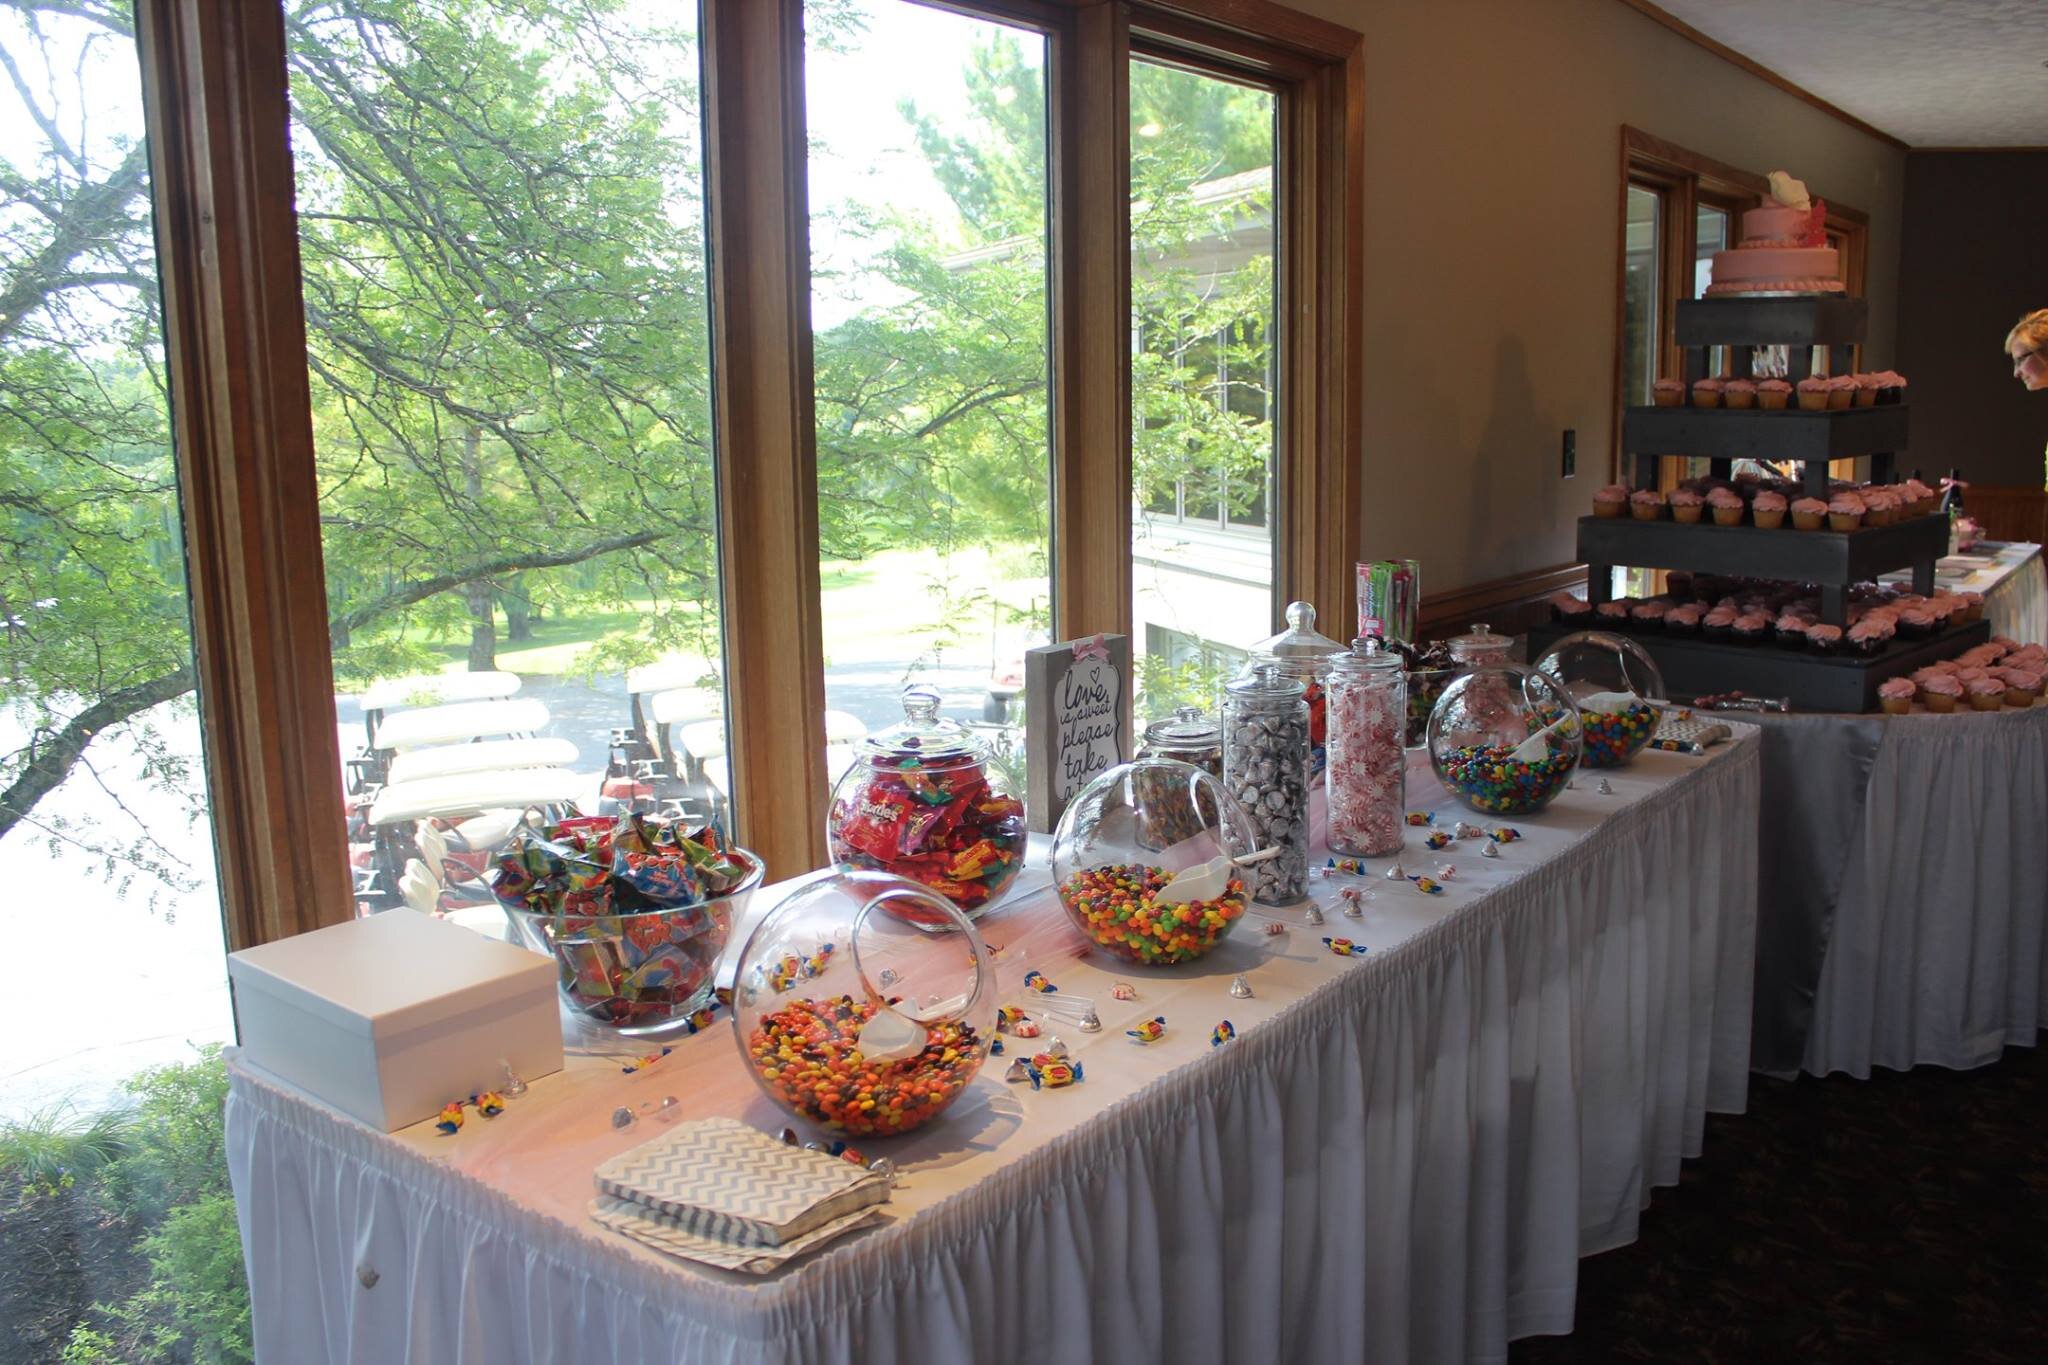 view out window and candy table.jpg